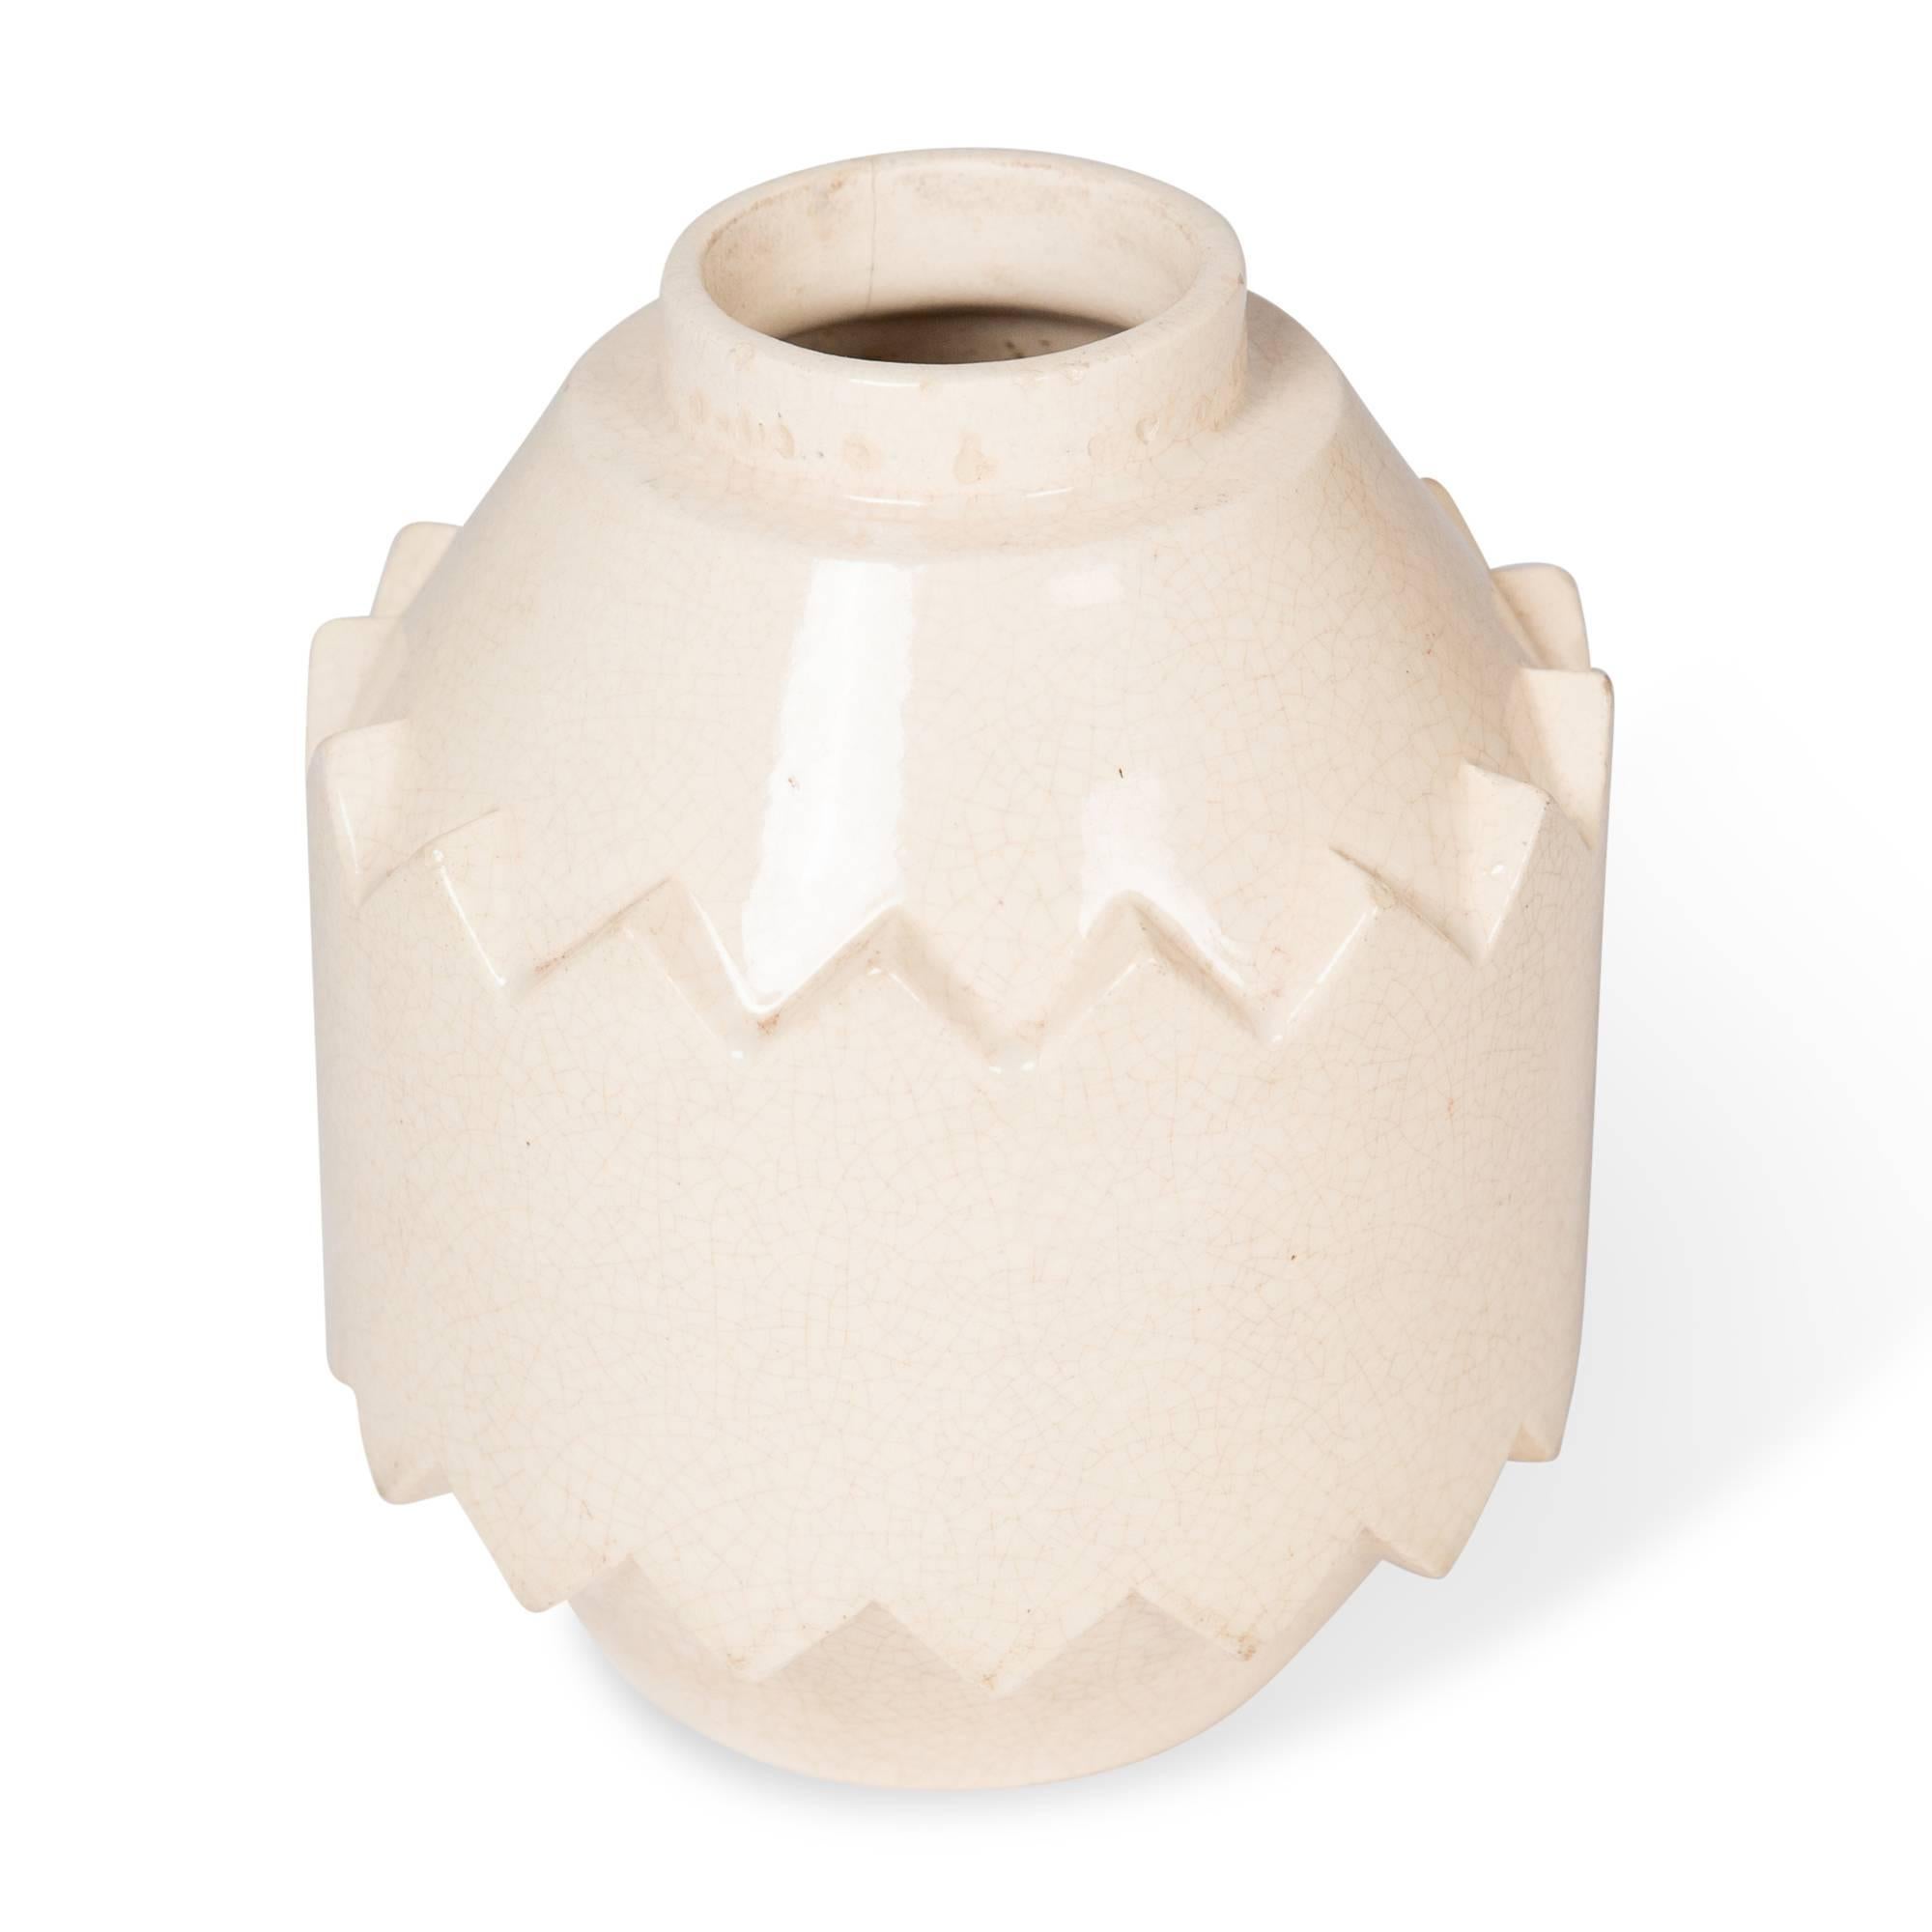 Beige crackle glaze ceramic vase, of cylindrical form and chevron sawtooth edge raised centre band, by Robert Lallemant, France 1930s. Signed to underside. Measures: Height 8 in, diameter 6 in.

Note: Some edgewear, hairline crack. See